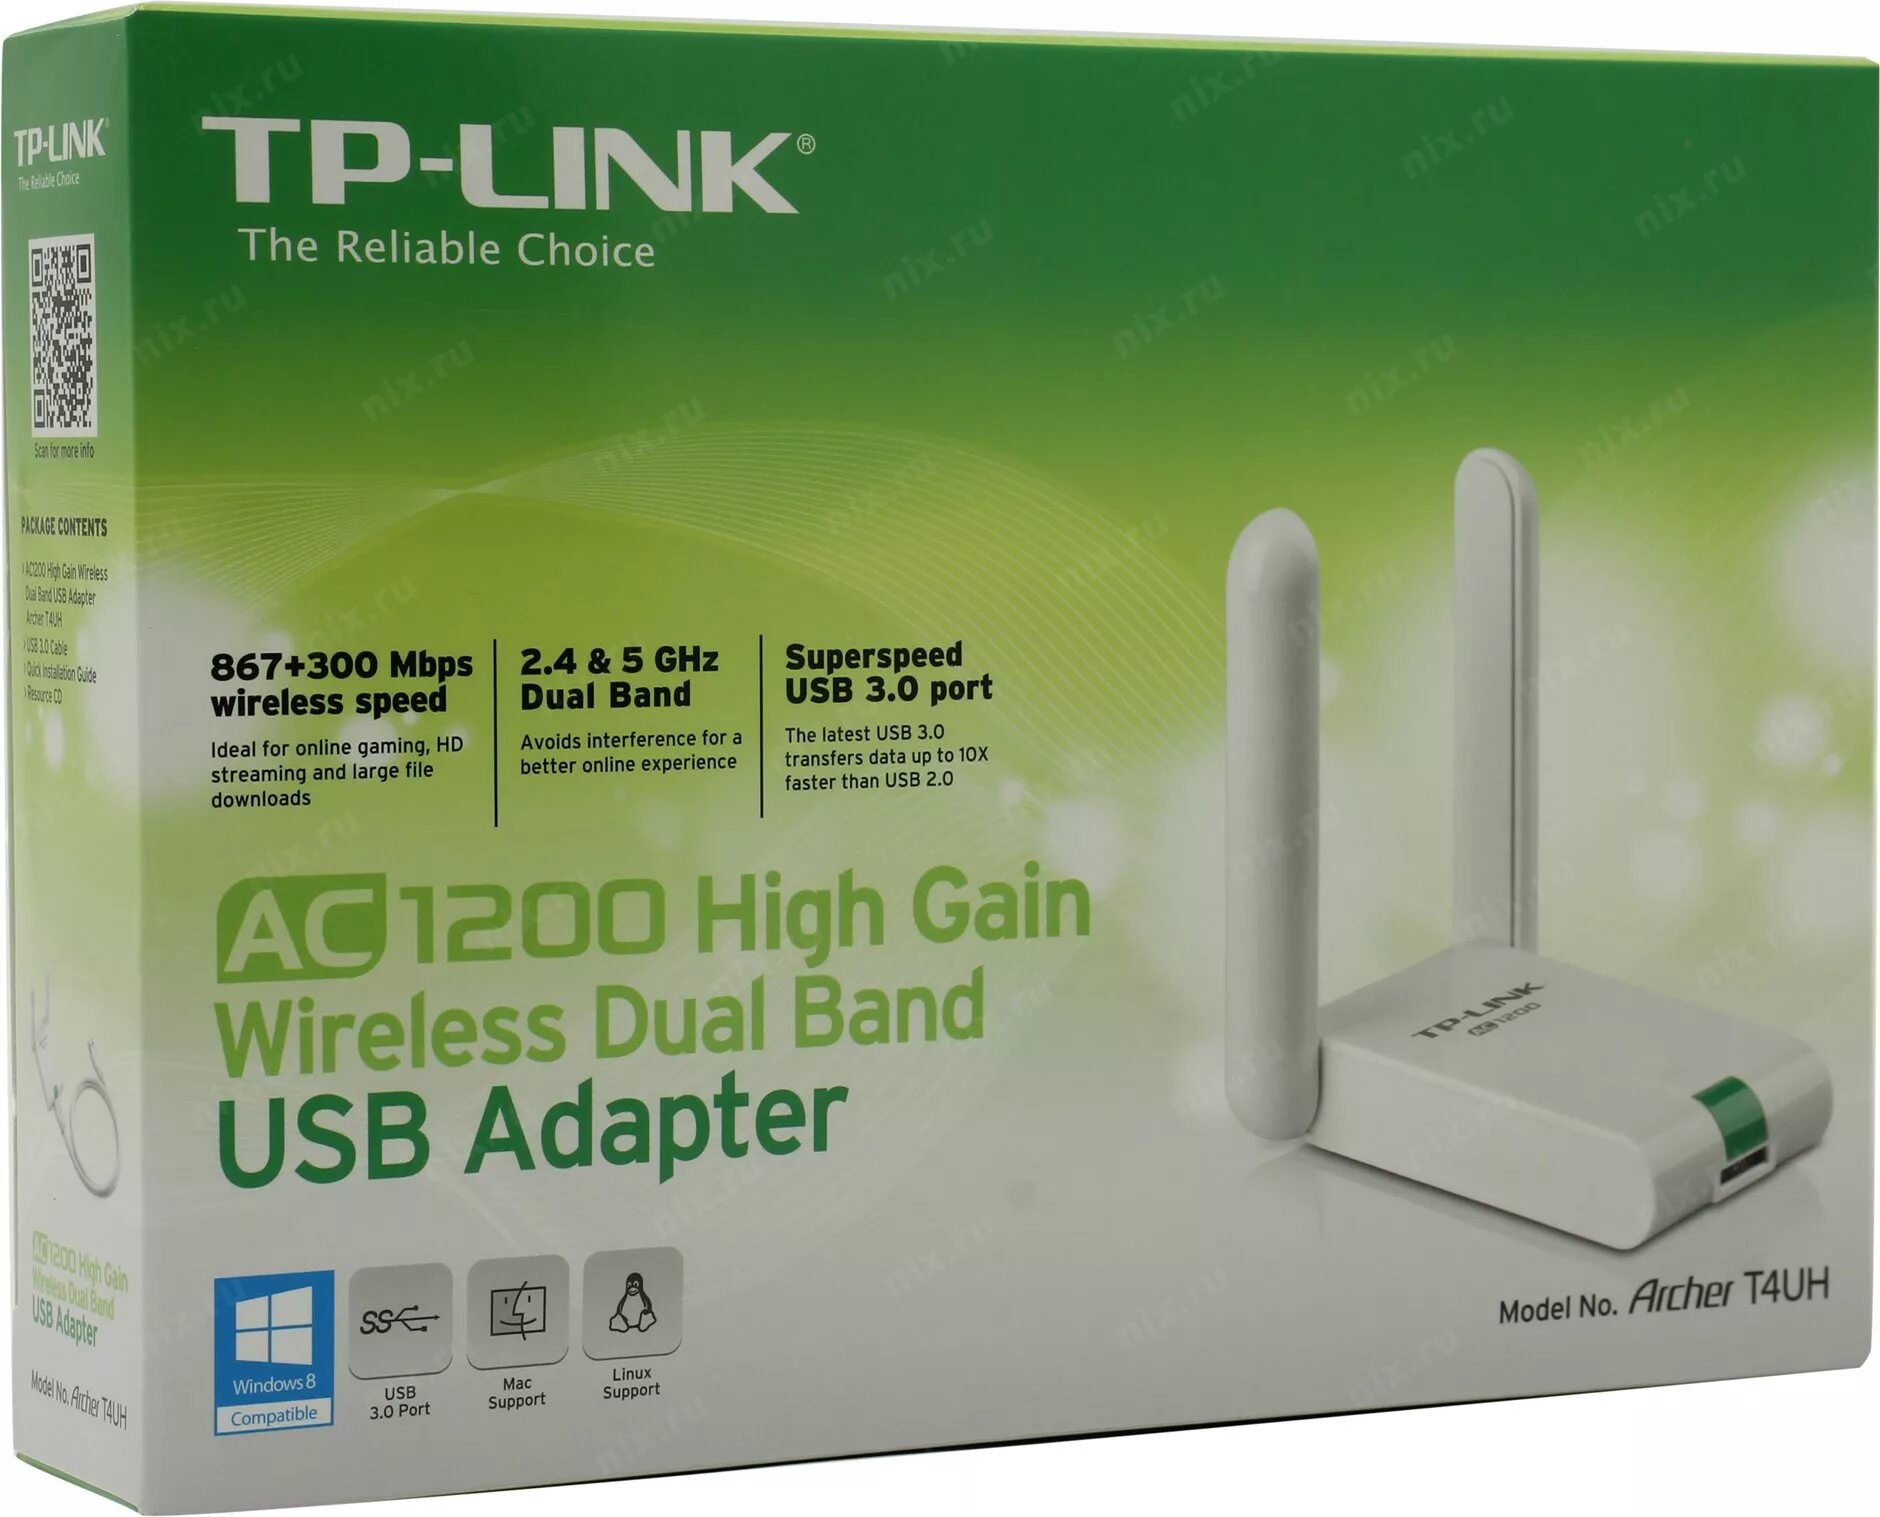 Tp link high gain. TP-link t4uh. Adapter TP-link TL-wn822n. Адаптер TP-link Archer t4.. Карта WIFI TP-link TL-wn822n.